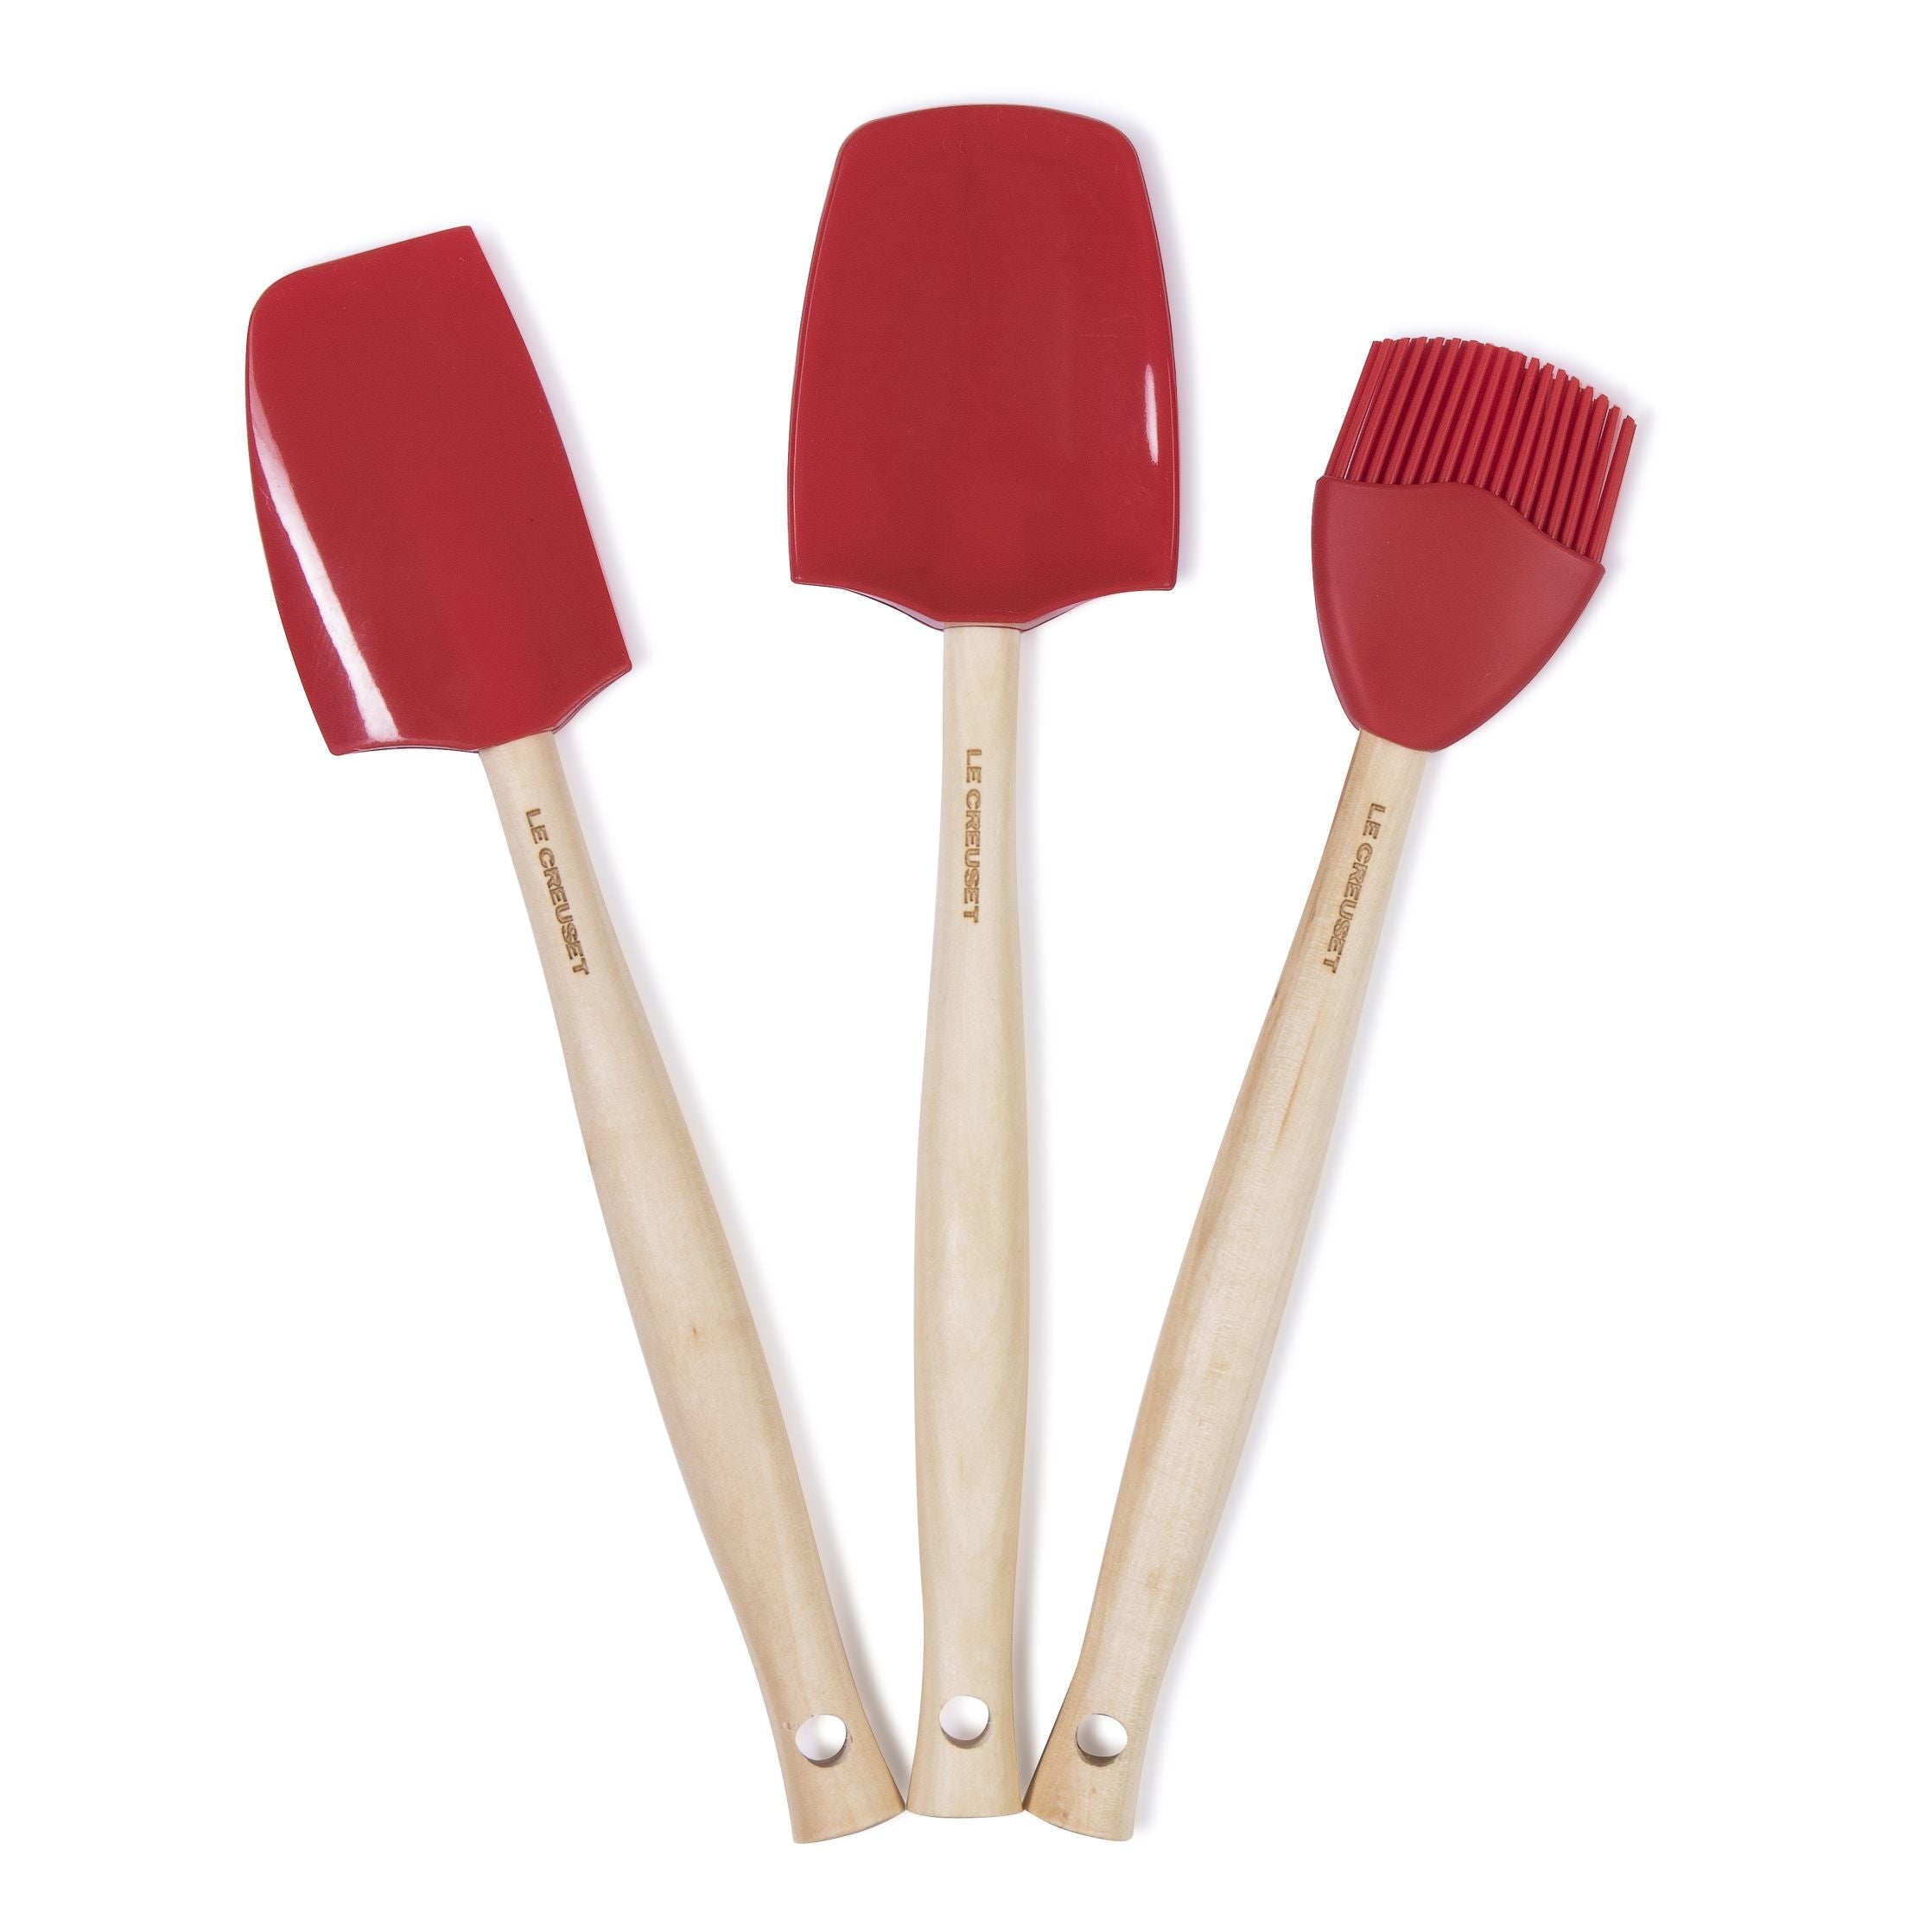 Le Creuset Cooking Trowel Craft 3 Piece, Cherry Red